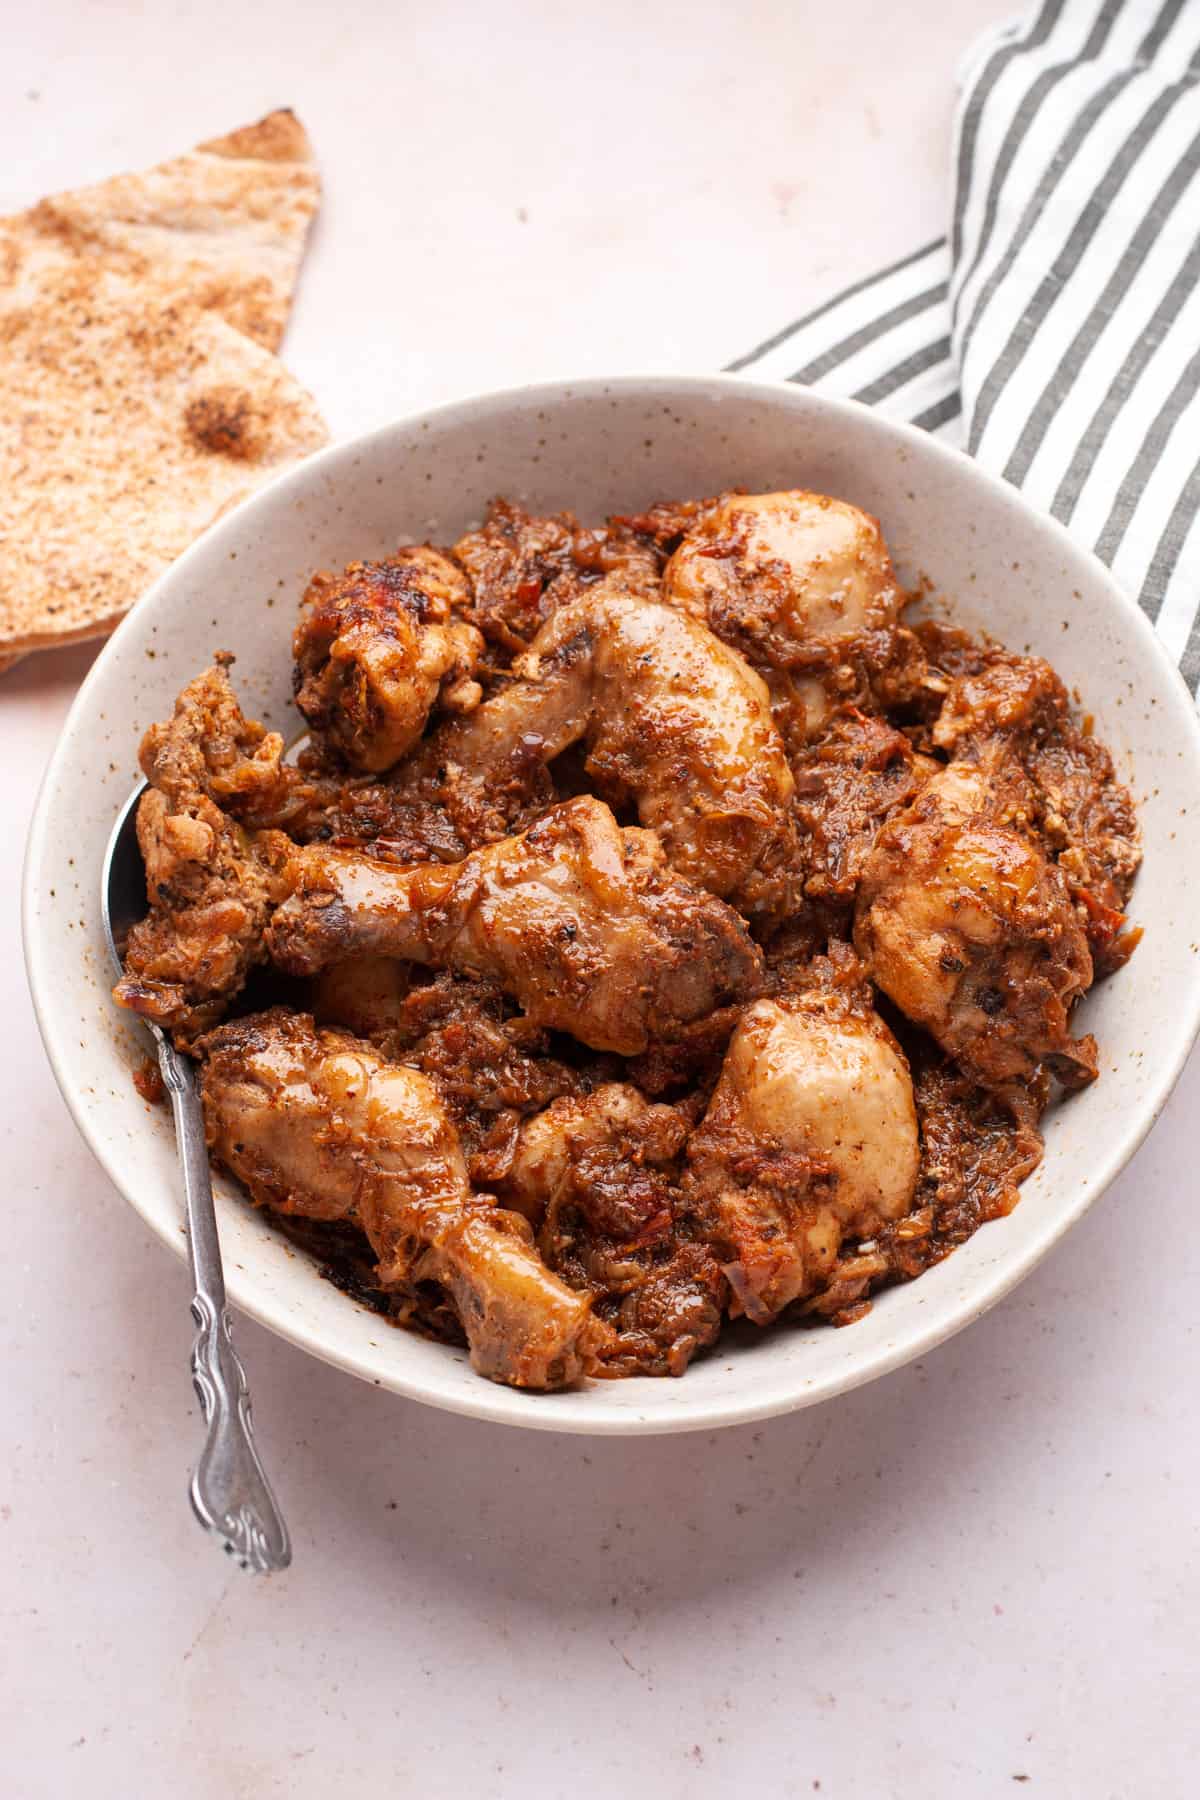 Chicken bhuna masala in a bowl with spoon.